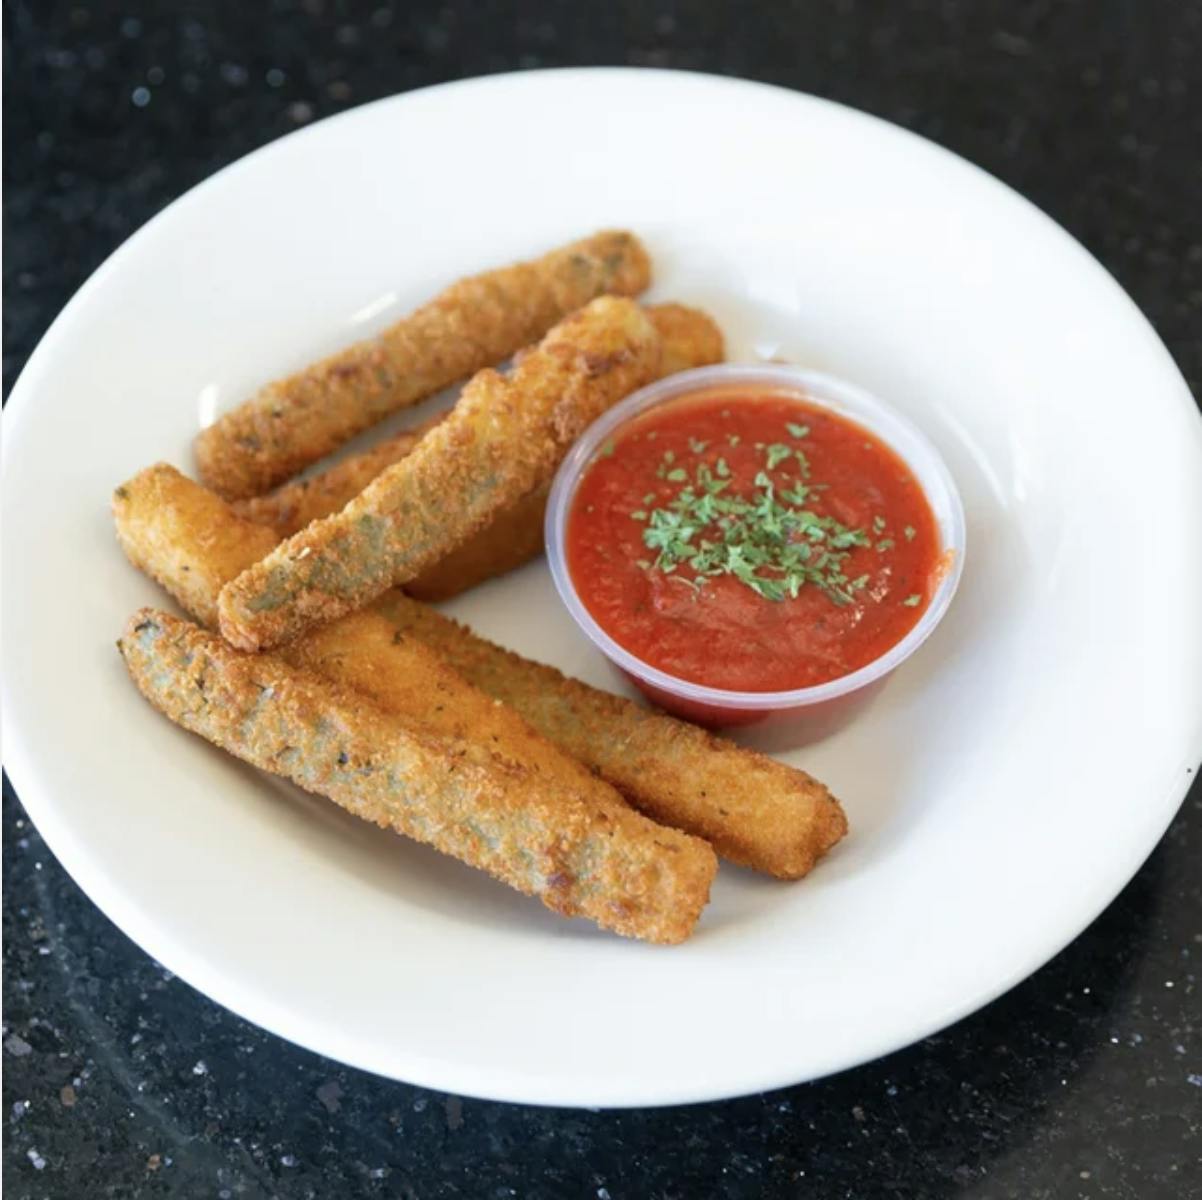 Zucchini Sticks from Aroma Pizza & Pasta in Lake Forest, CA